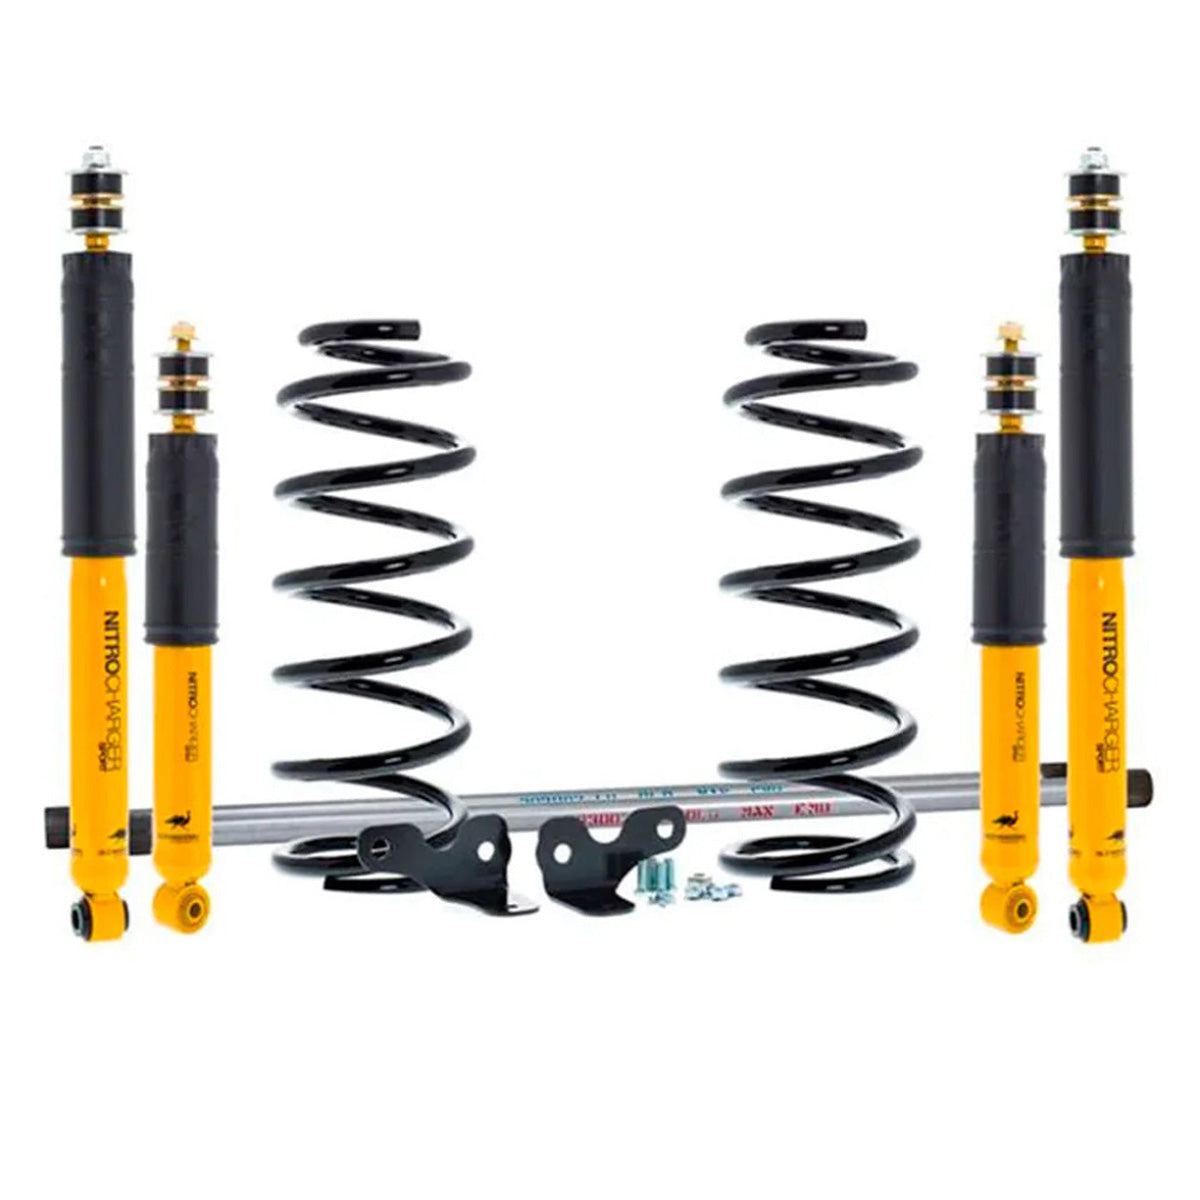 A suspension kit with the OME 2 inch Lift Kit for LandCruiser 100 Series, Lexus LX470 (98-07 Diesel Models) from Old Man Emu suspension system and Nitrocharger shocks, designed to provide improved ground clearance.